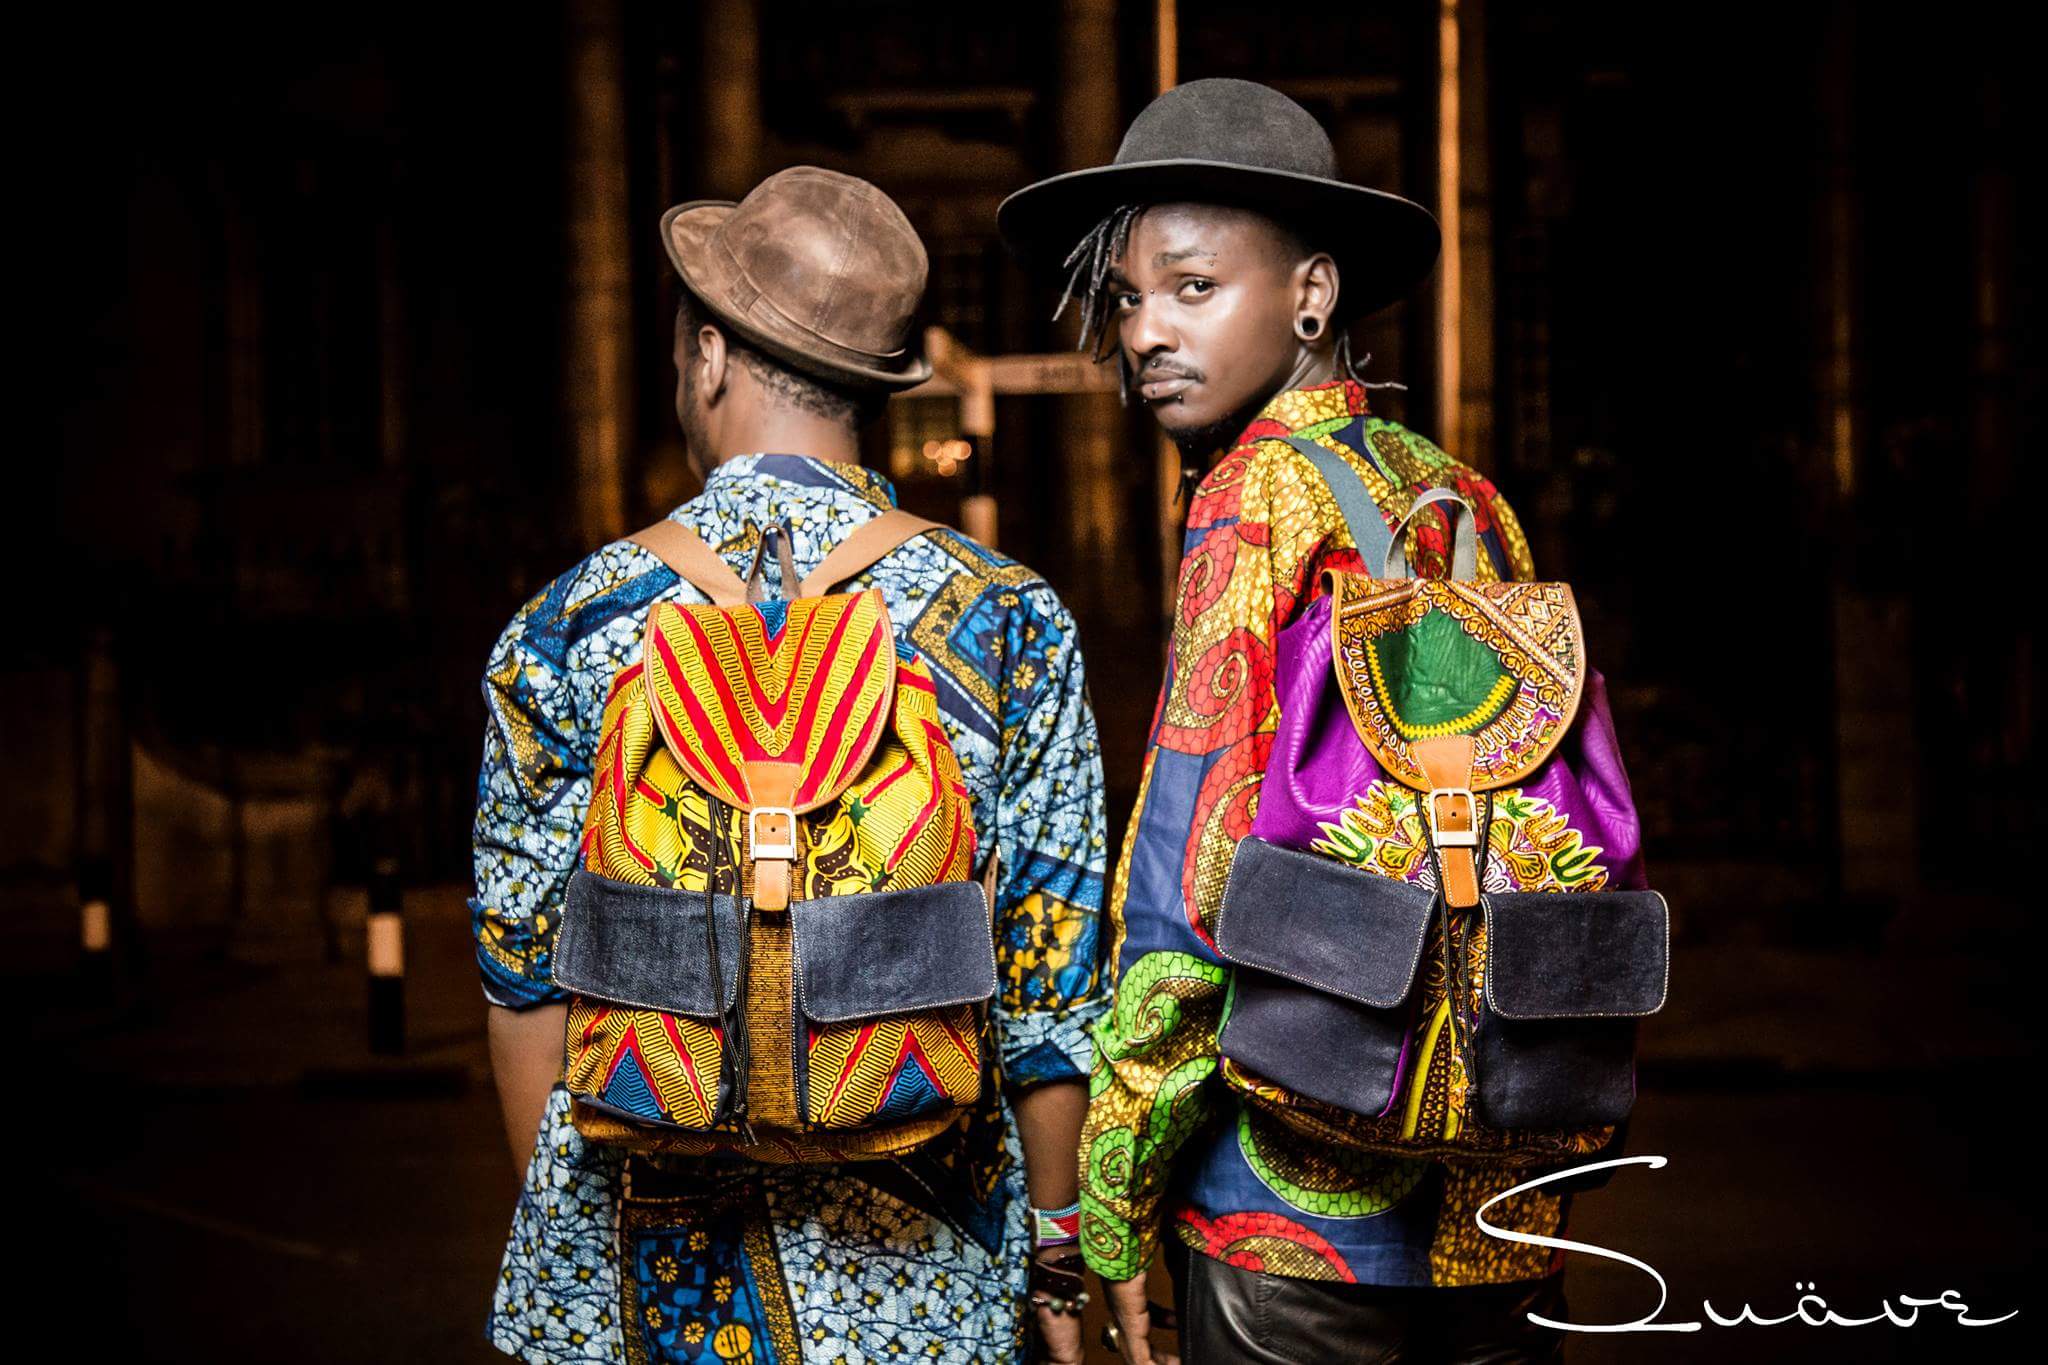 Suave Kenya makes roughly makes about 150 to 200 bags a month and over time the workers here have perfected the designs, making sure each handmade bag is made to international standards.